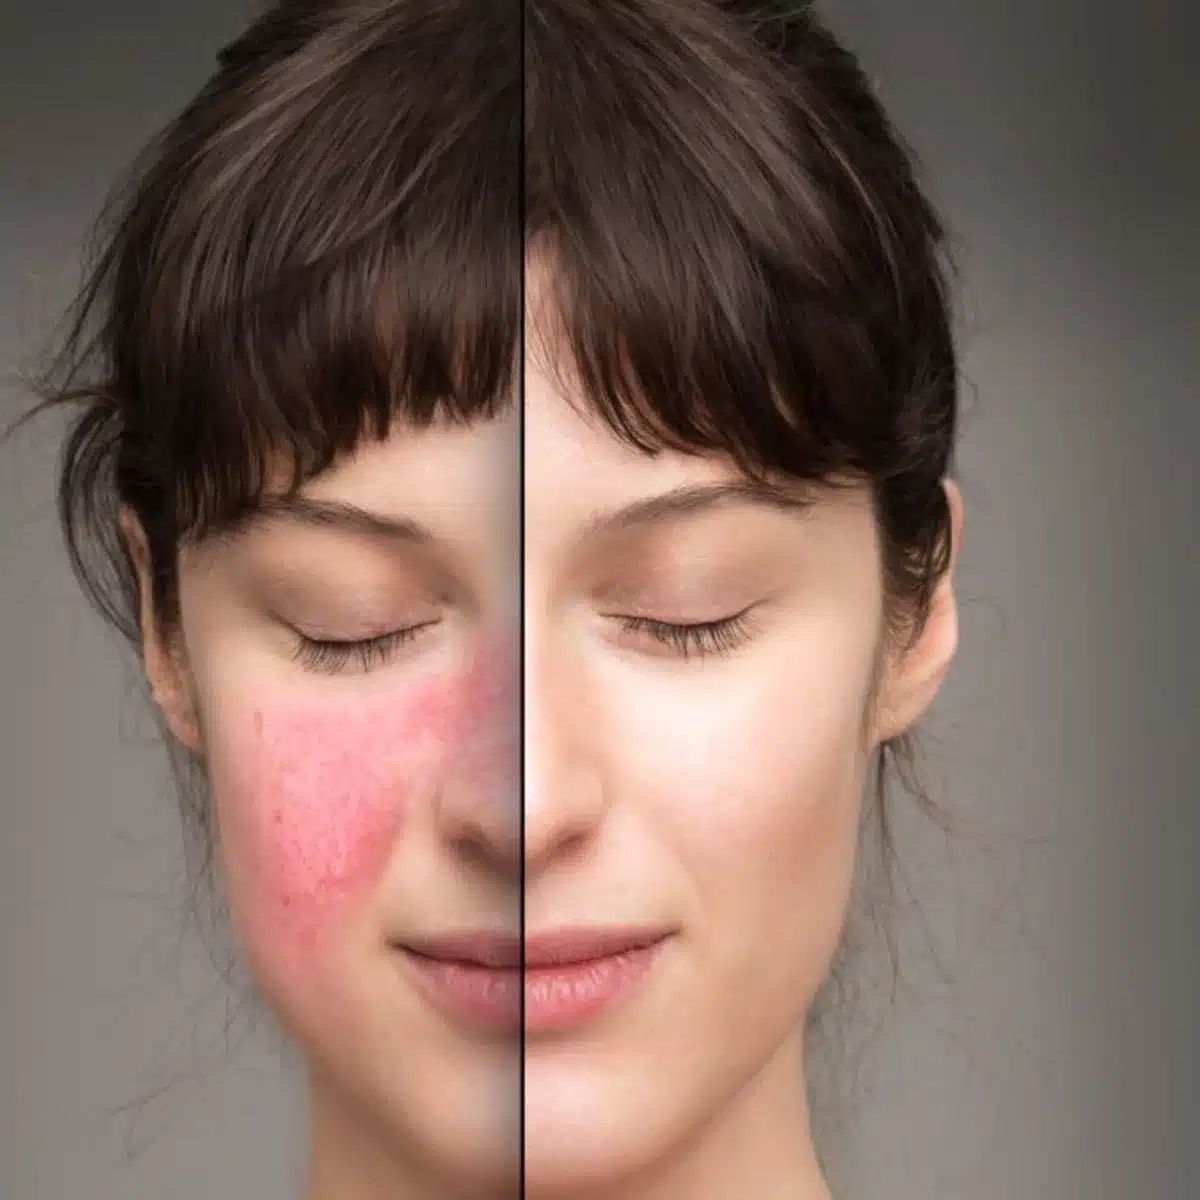 Redness or Rosacea: Differentiating Between Common Skin Concerns